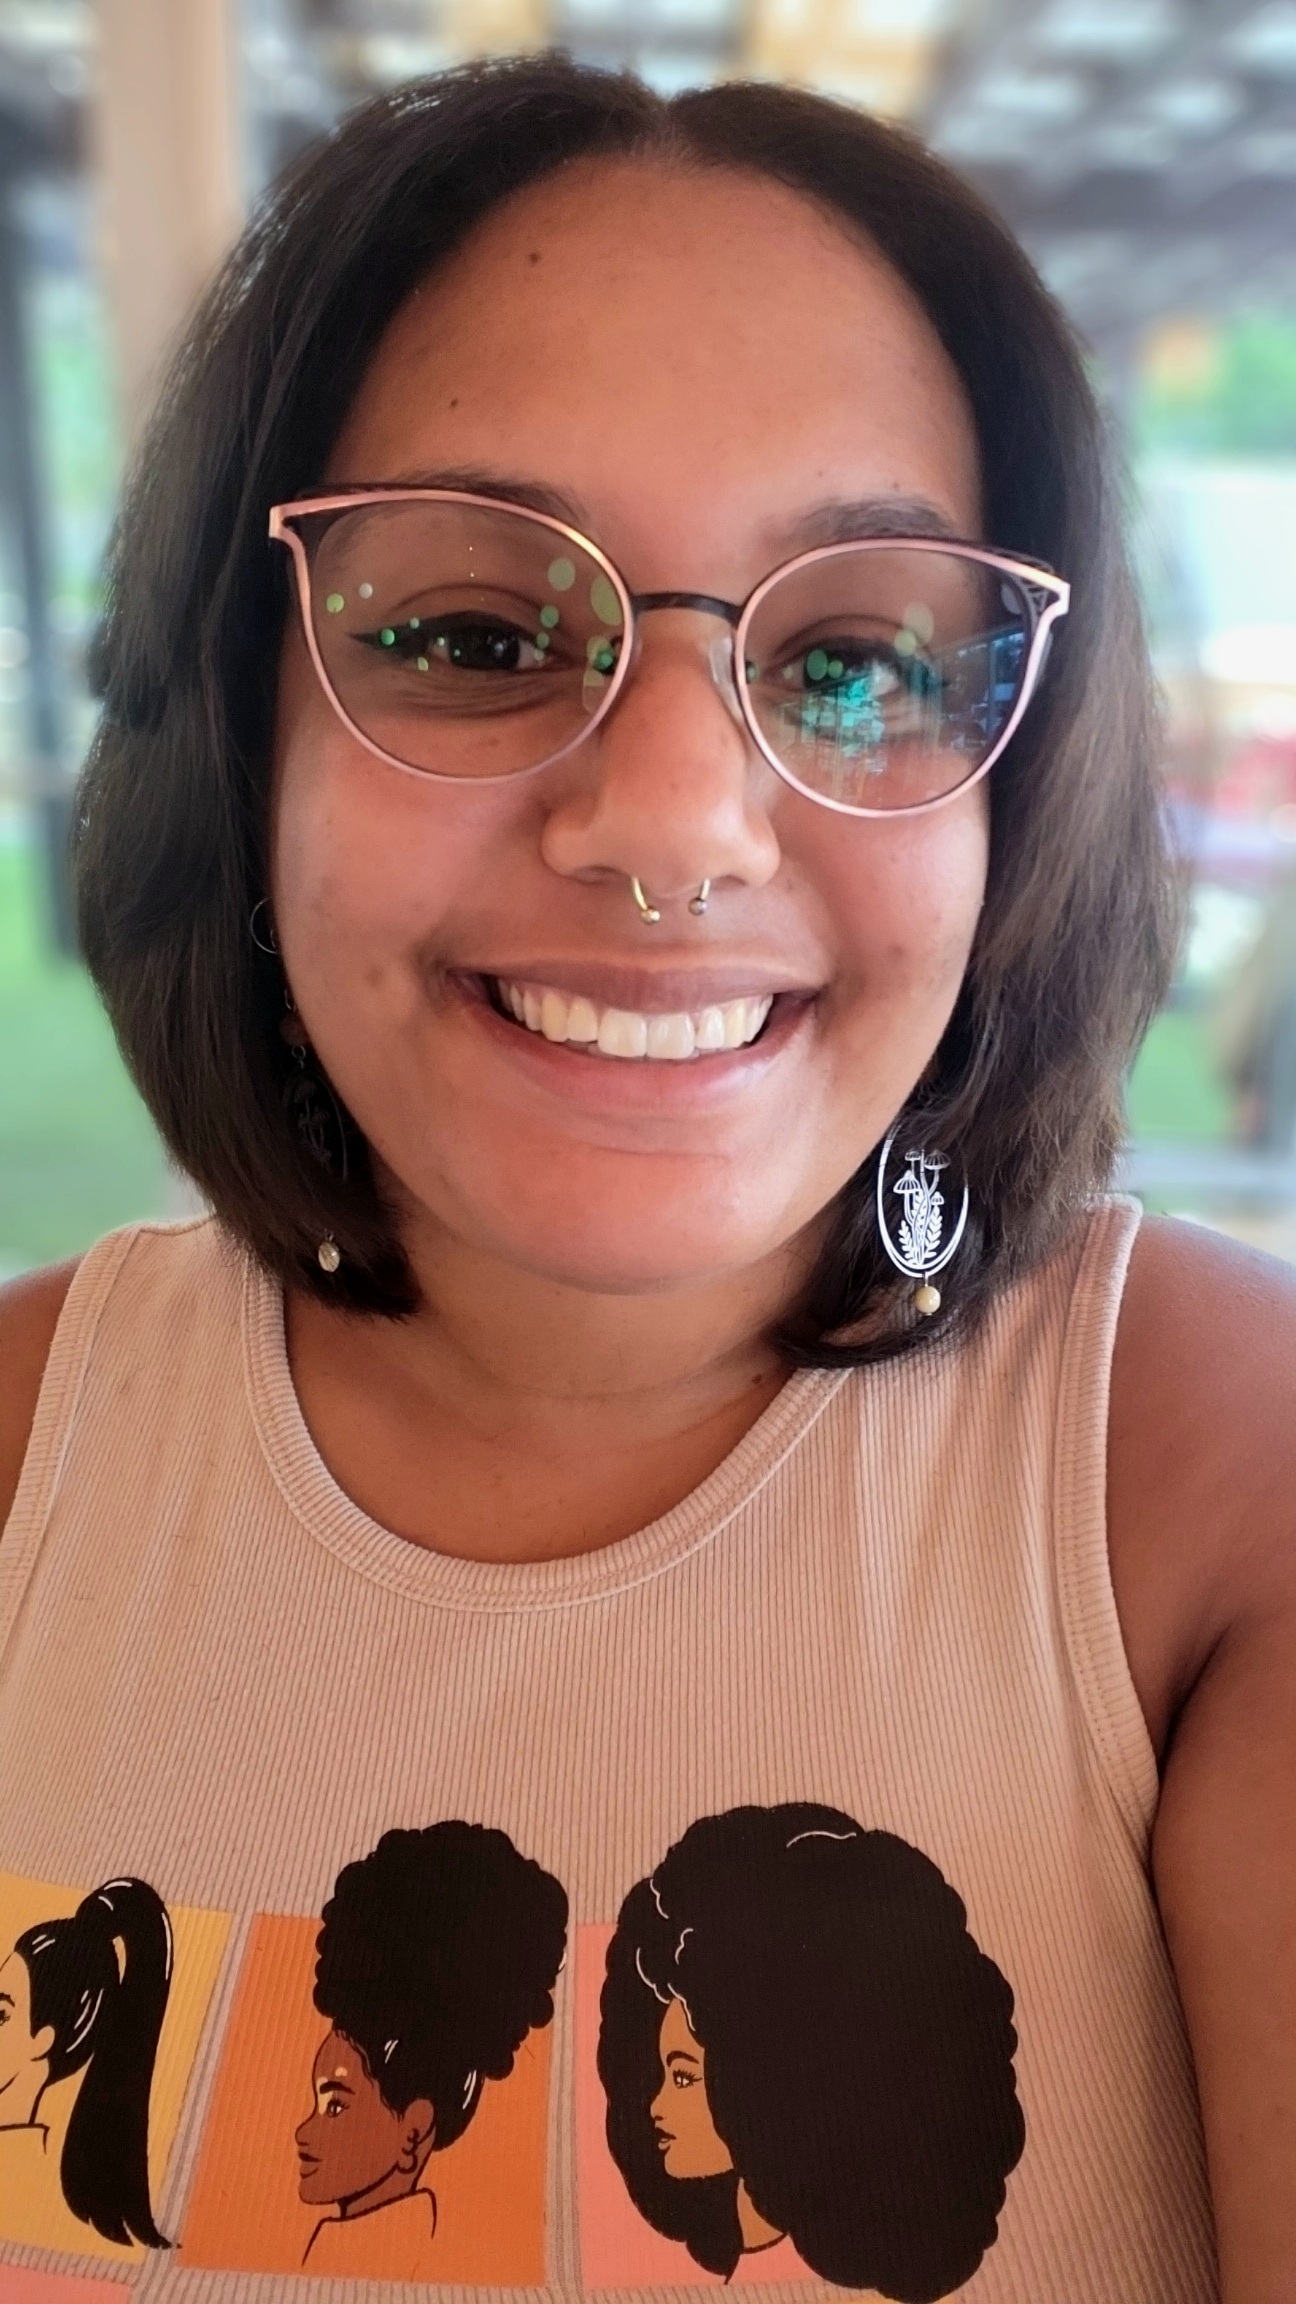 C.R. Dean smiles openly at the camera. She is wearing winged black eyeliner, glasses with black and rose gold metal rims, silver earrings that depict mushrooms and foliage, and a septum piercing. She also wears a light-colored tank top illustrated with the side profiles of Black women with different hairstyles.